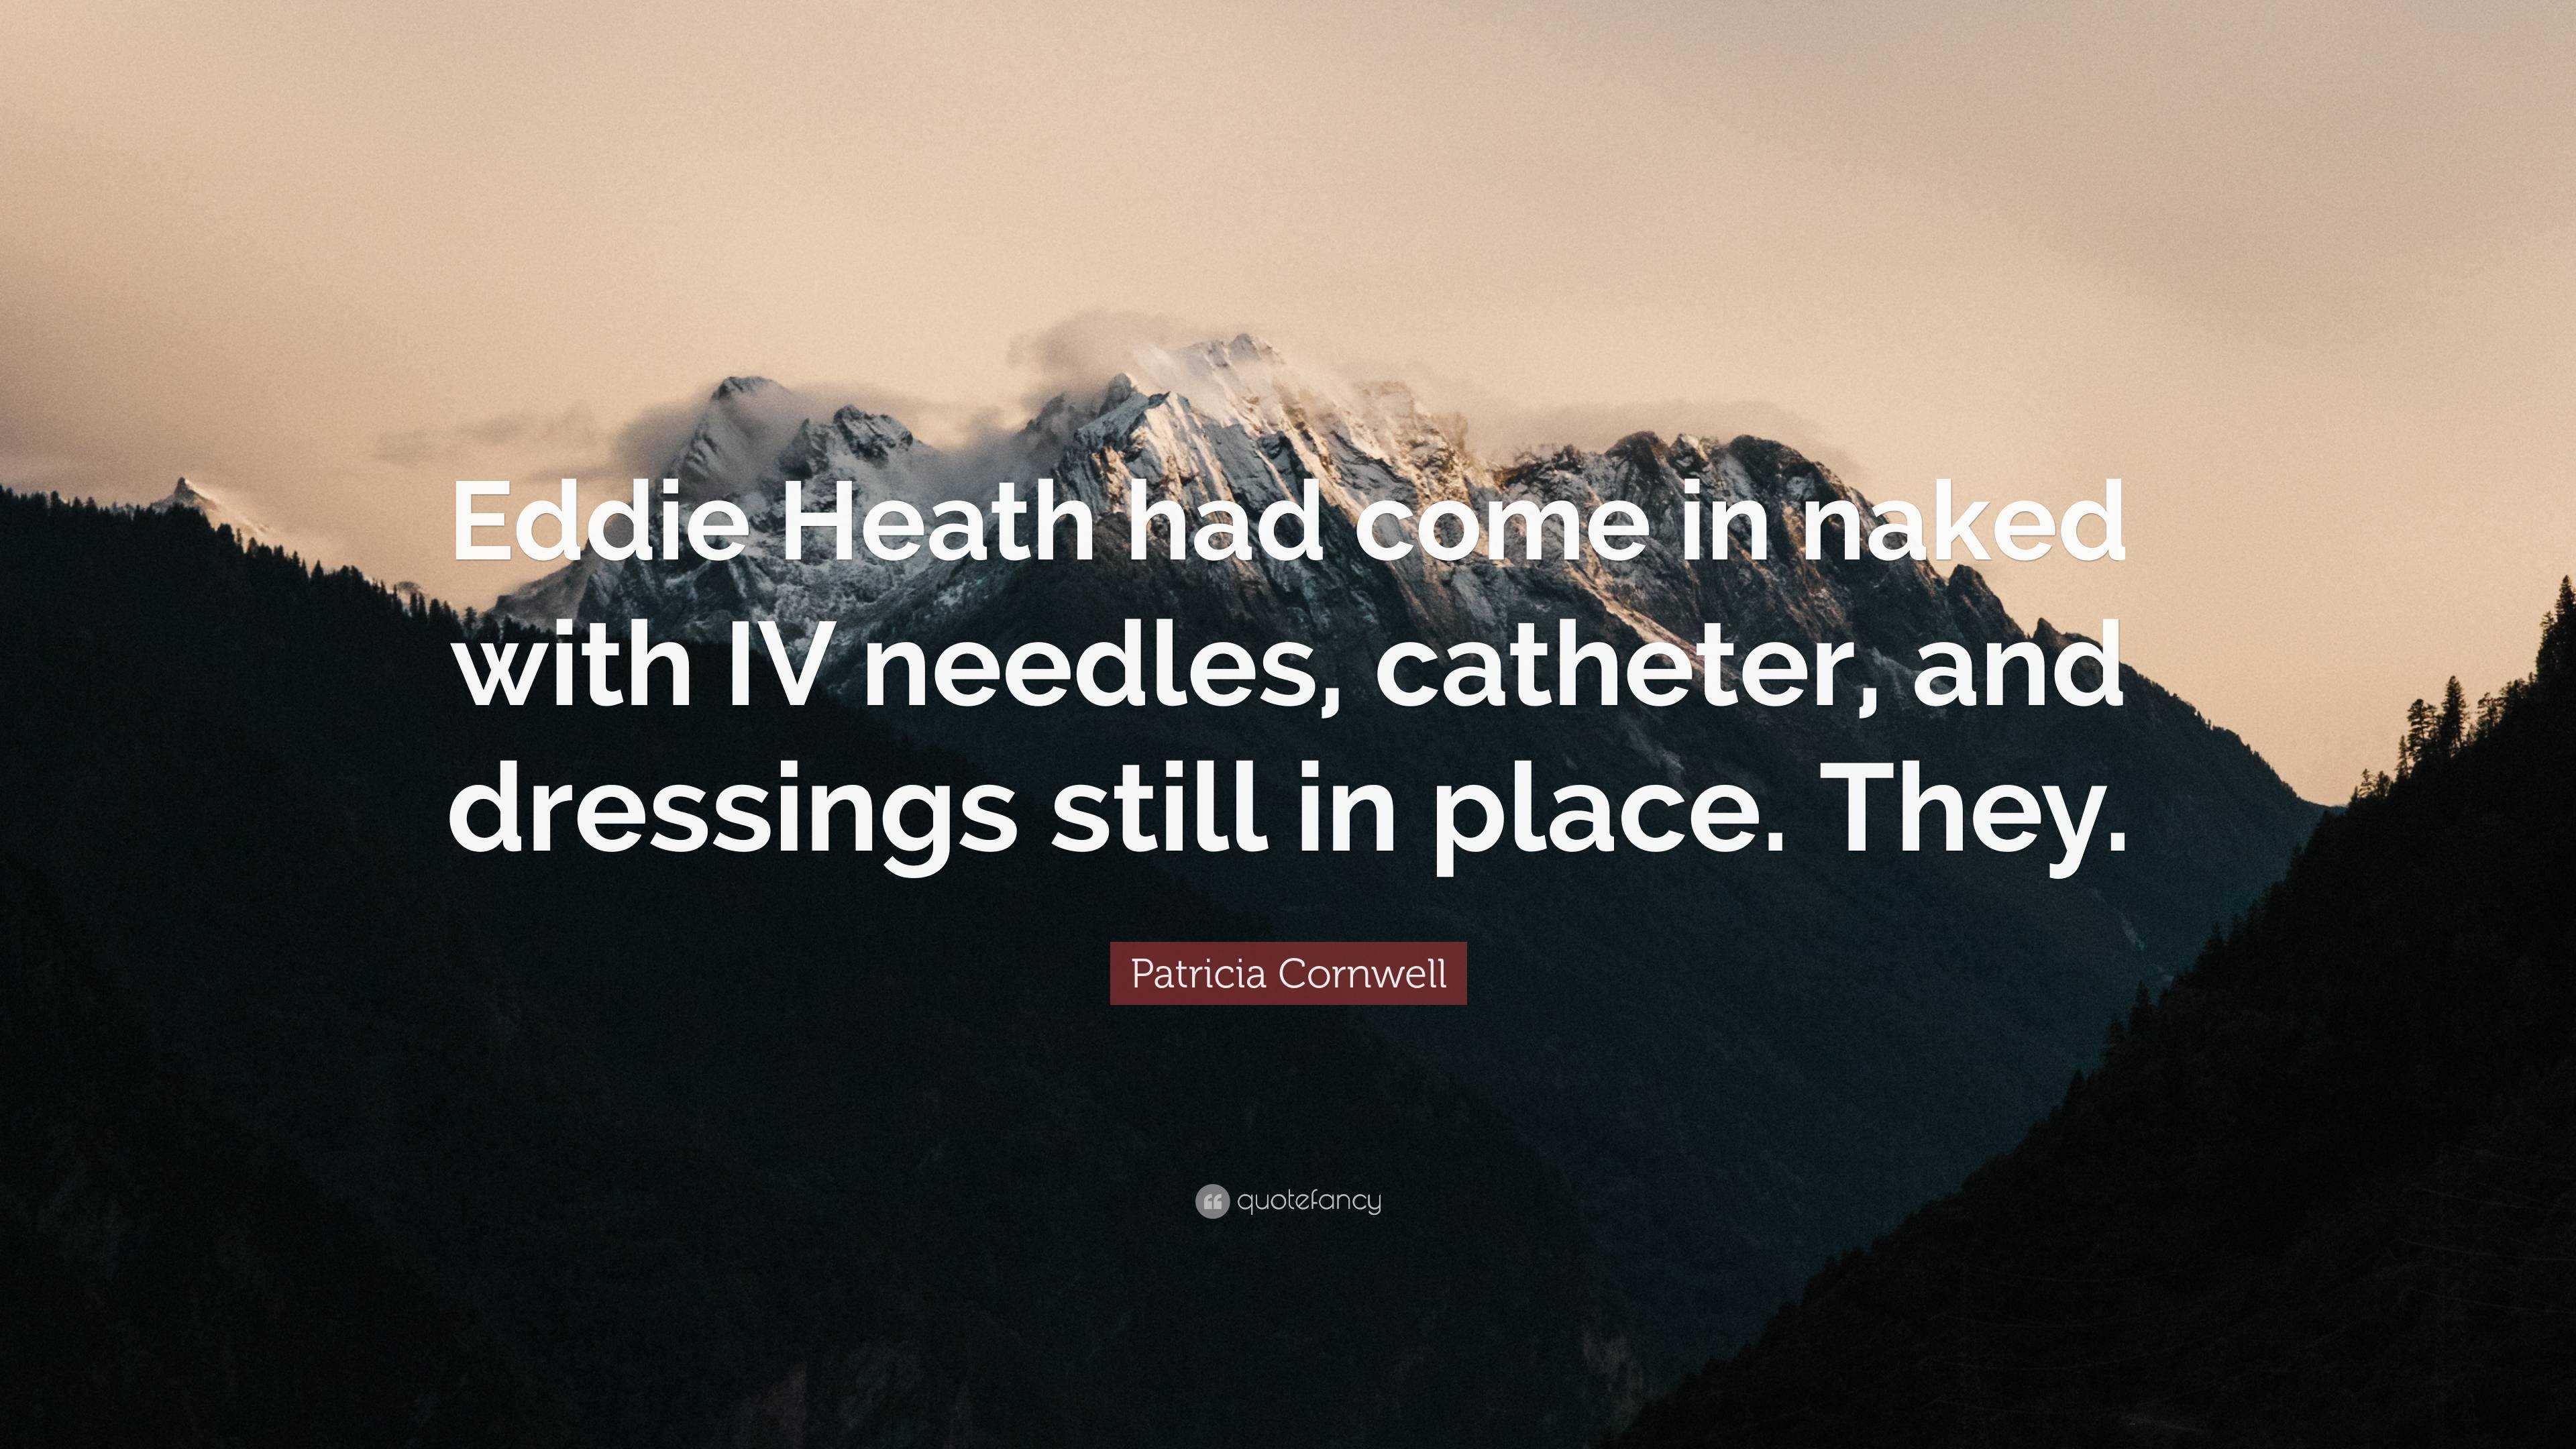 Patricia Cornwell Quote: “Eddie Heath had come in naked with IV needles,  catheter, and dressings still